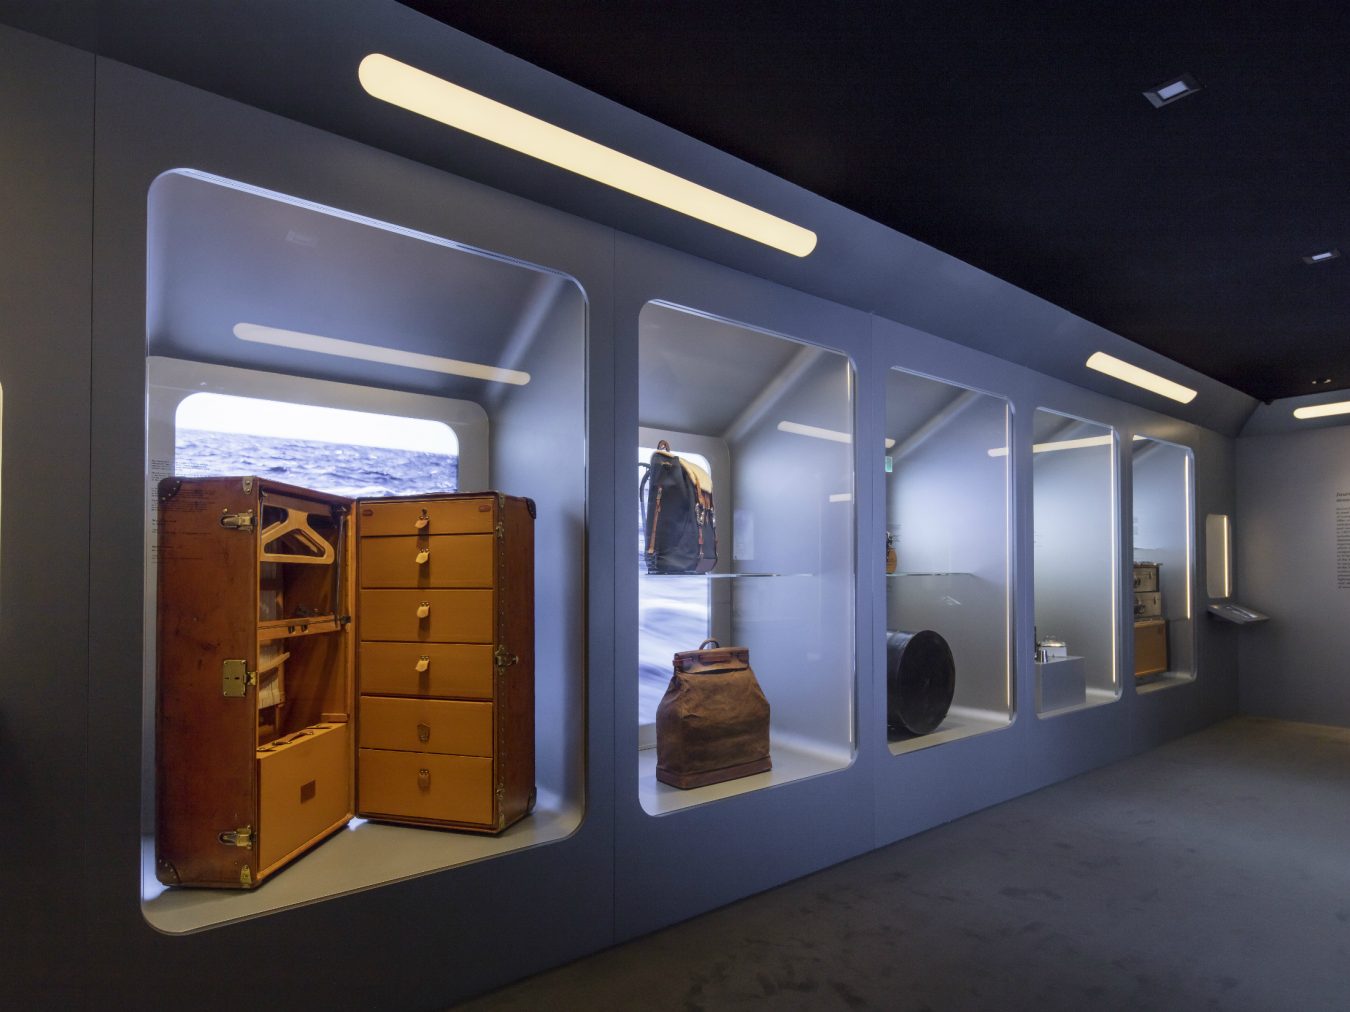 Louis Vuitton's 'Time Capsule' Exhibition Is Our Kind of Trunk